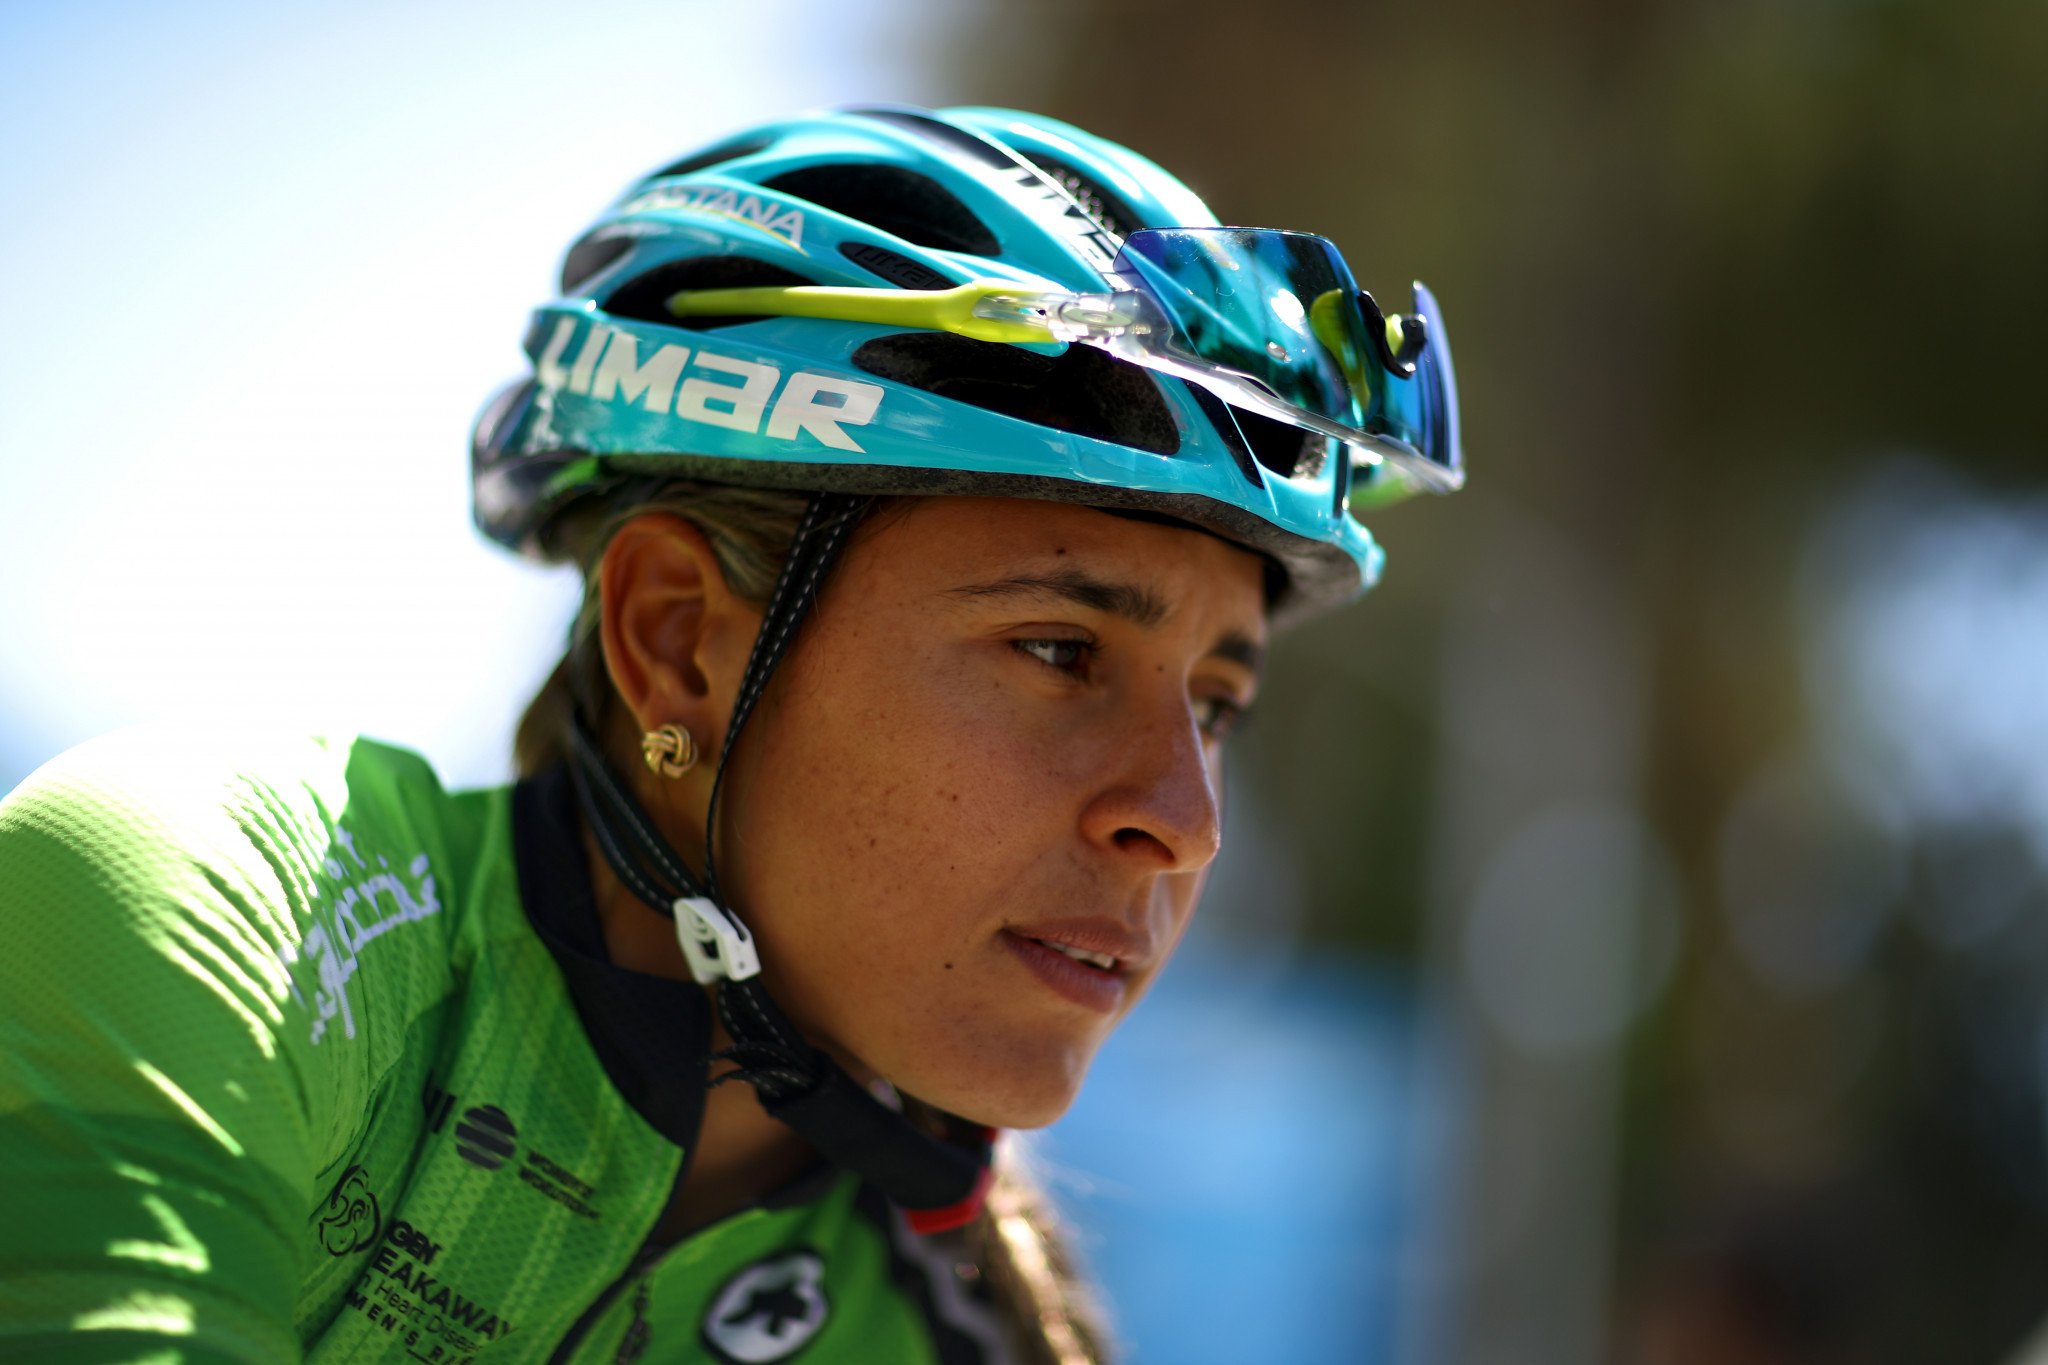 Cuba's Arlenis Sierra today won the women's elite event at the Cadel Evans Great Ocean Road Race, but it is not currently part of the UCI Women's WorldTour ©Getty Images